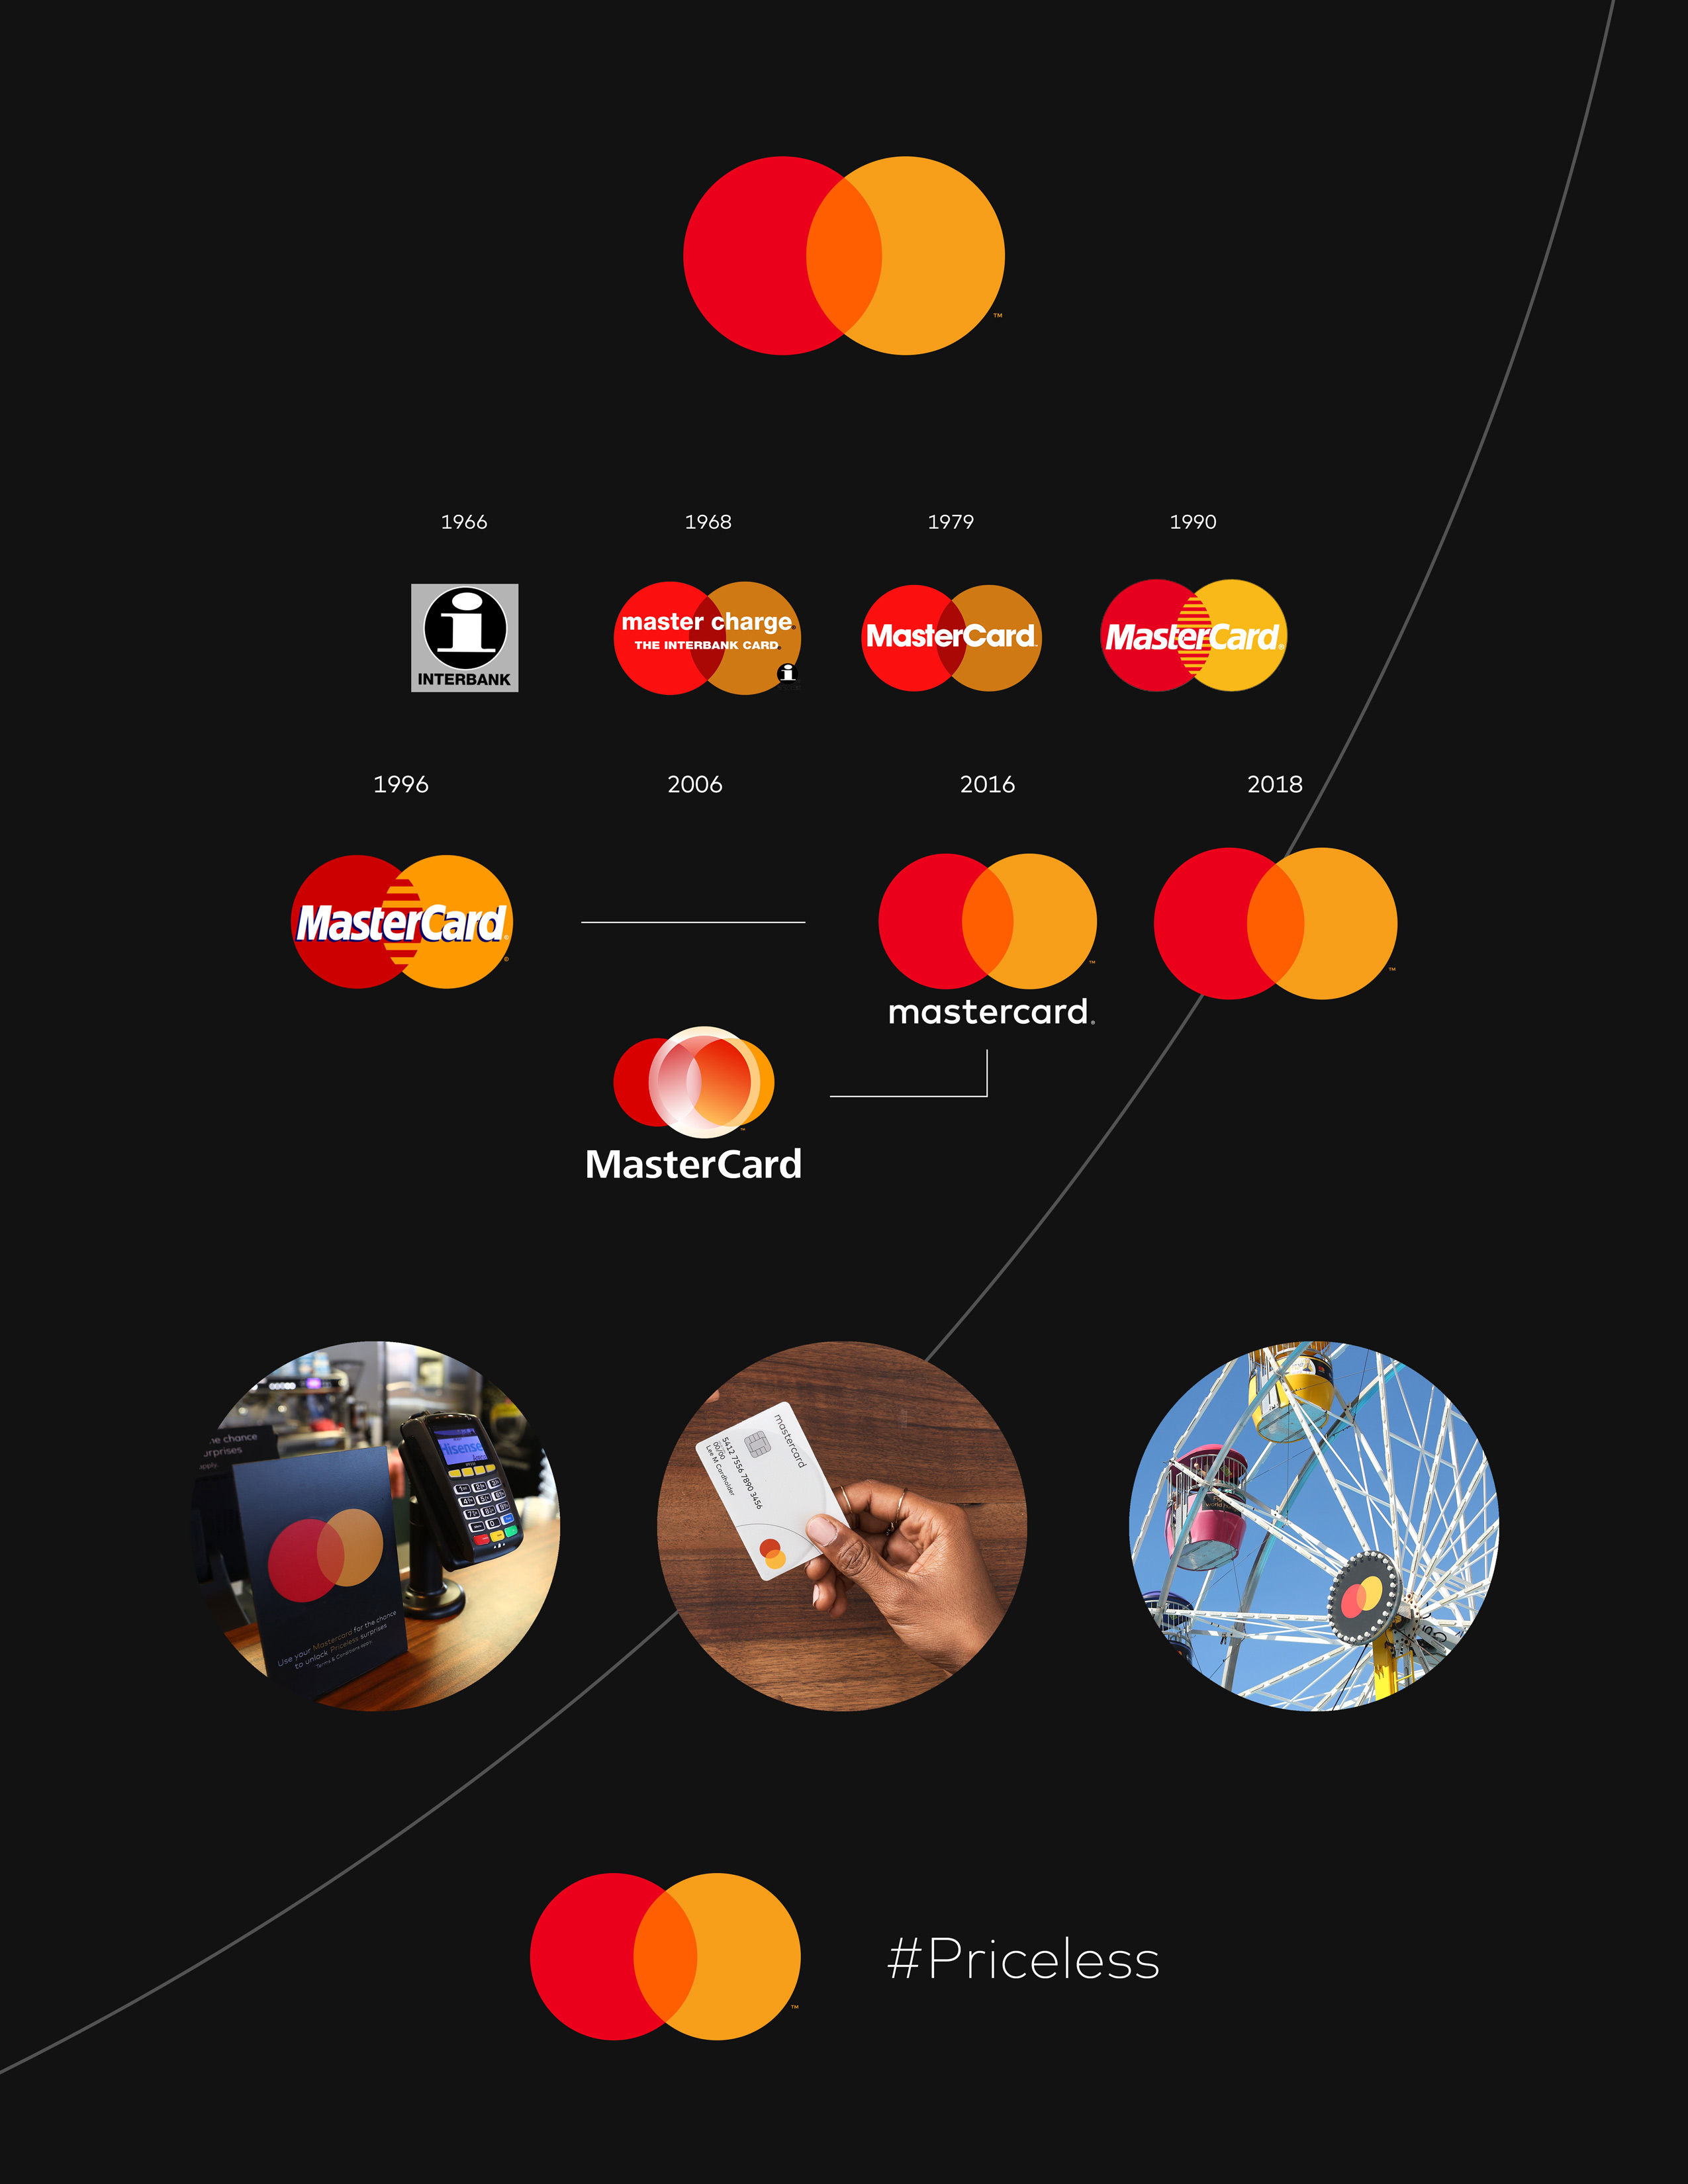 And finally… Mastercard rebrand ditches name from logo